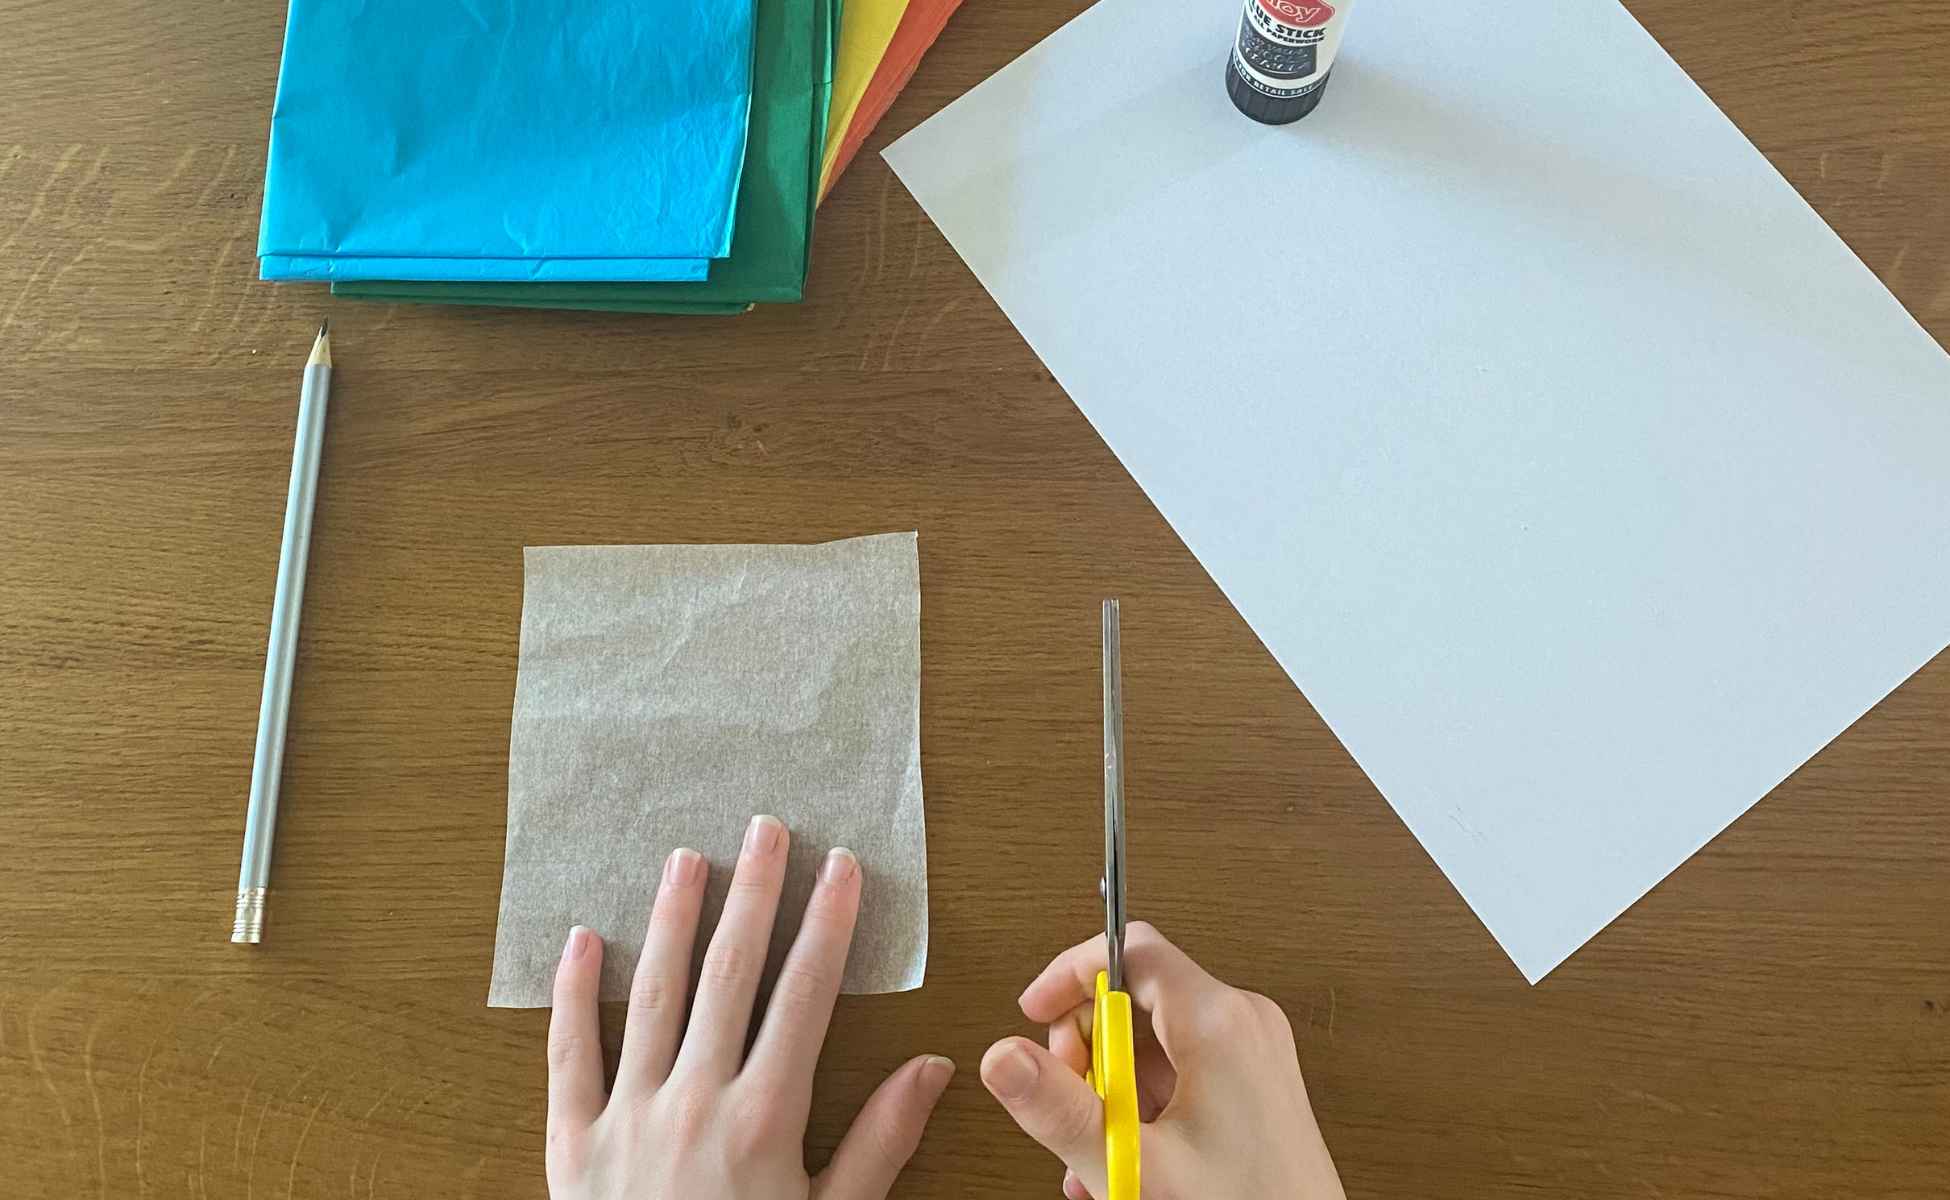 A child's hands cutting a square of greaseproof paper - step 1 of window art activity